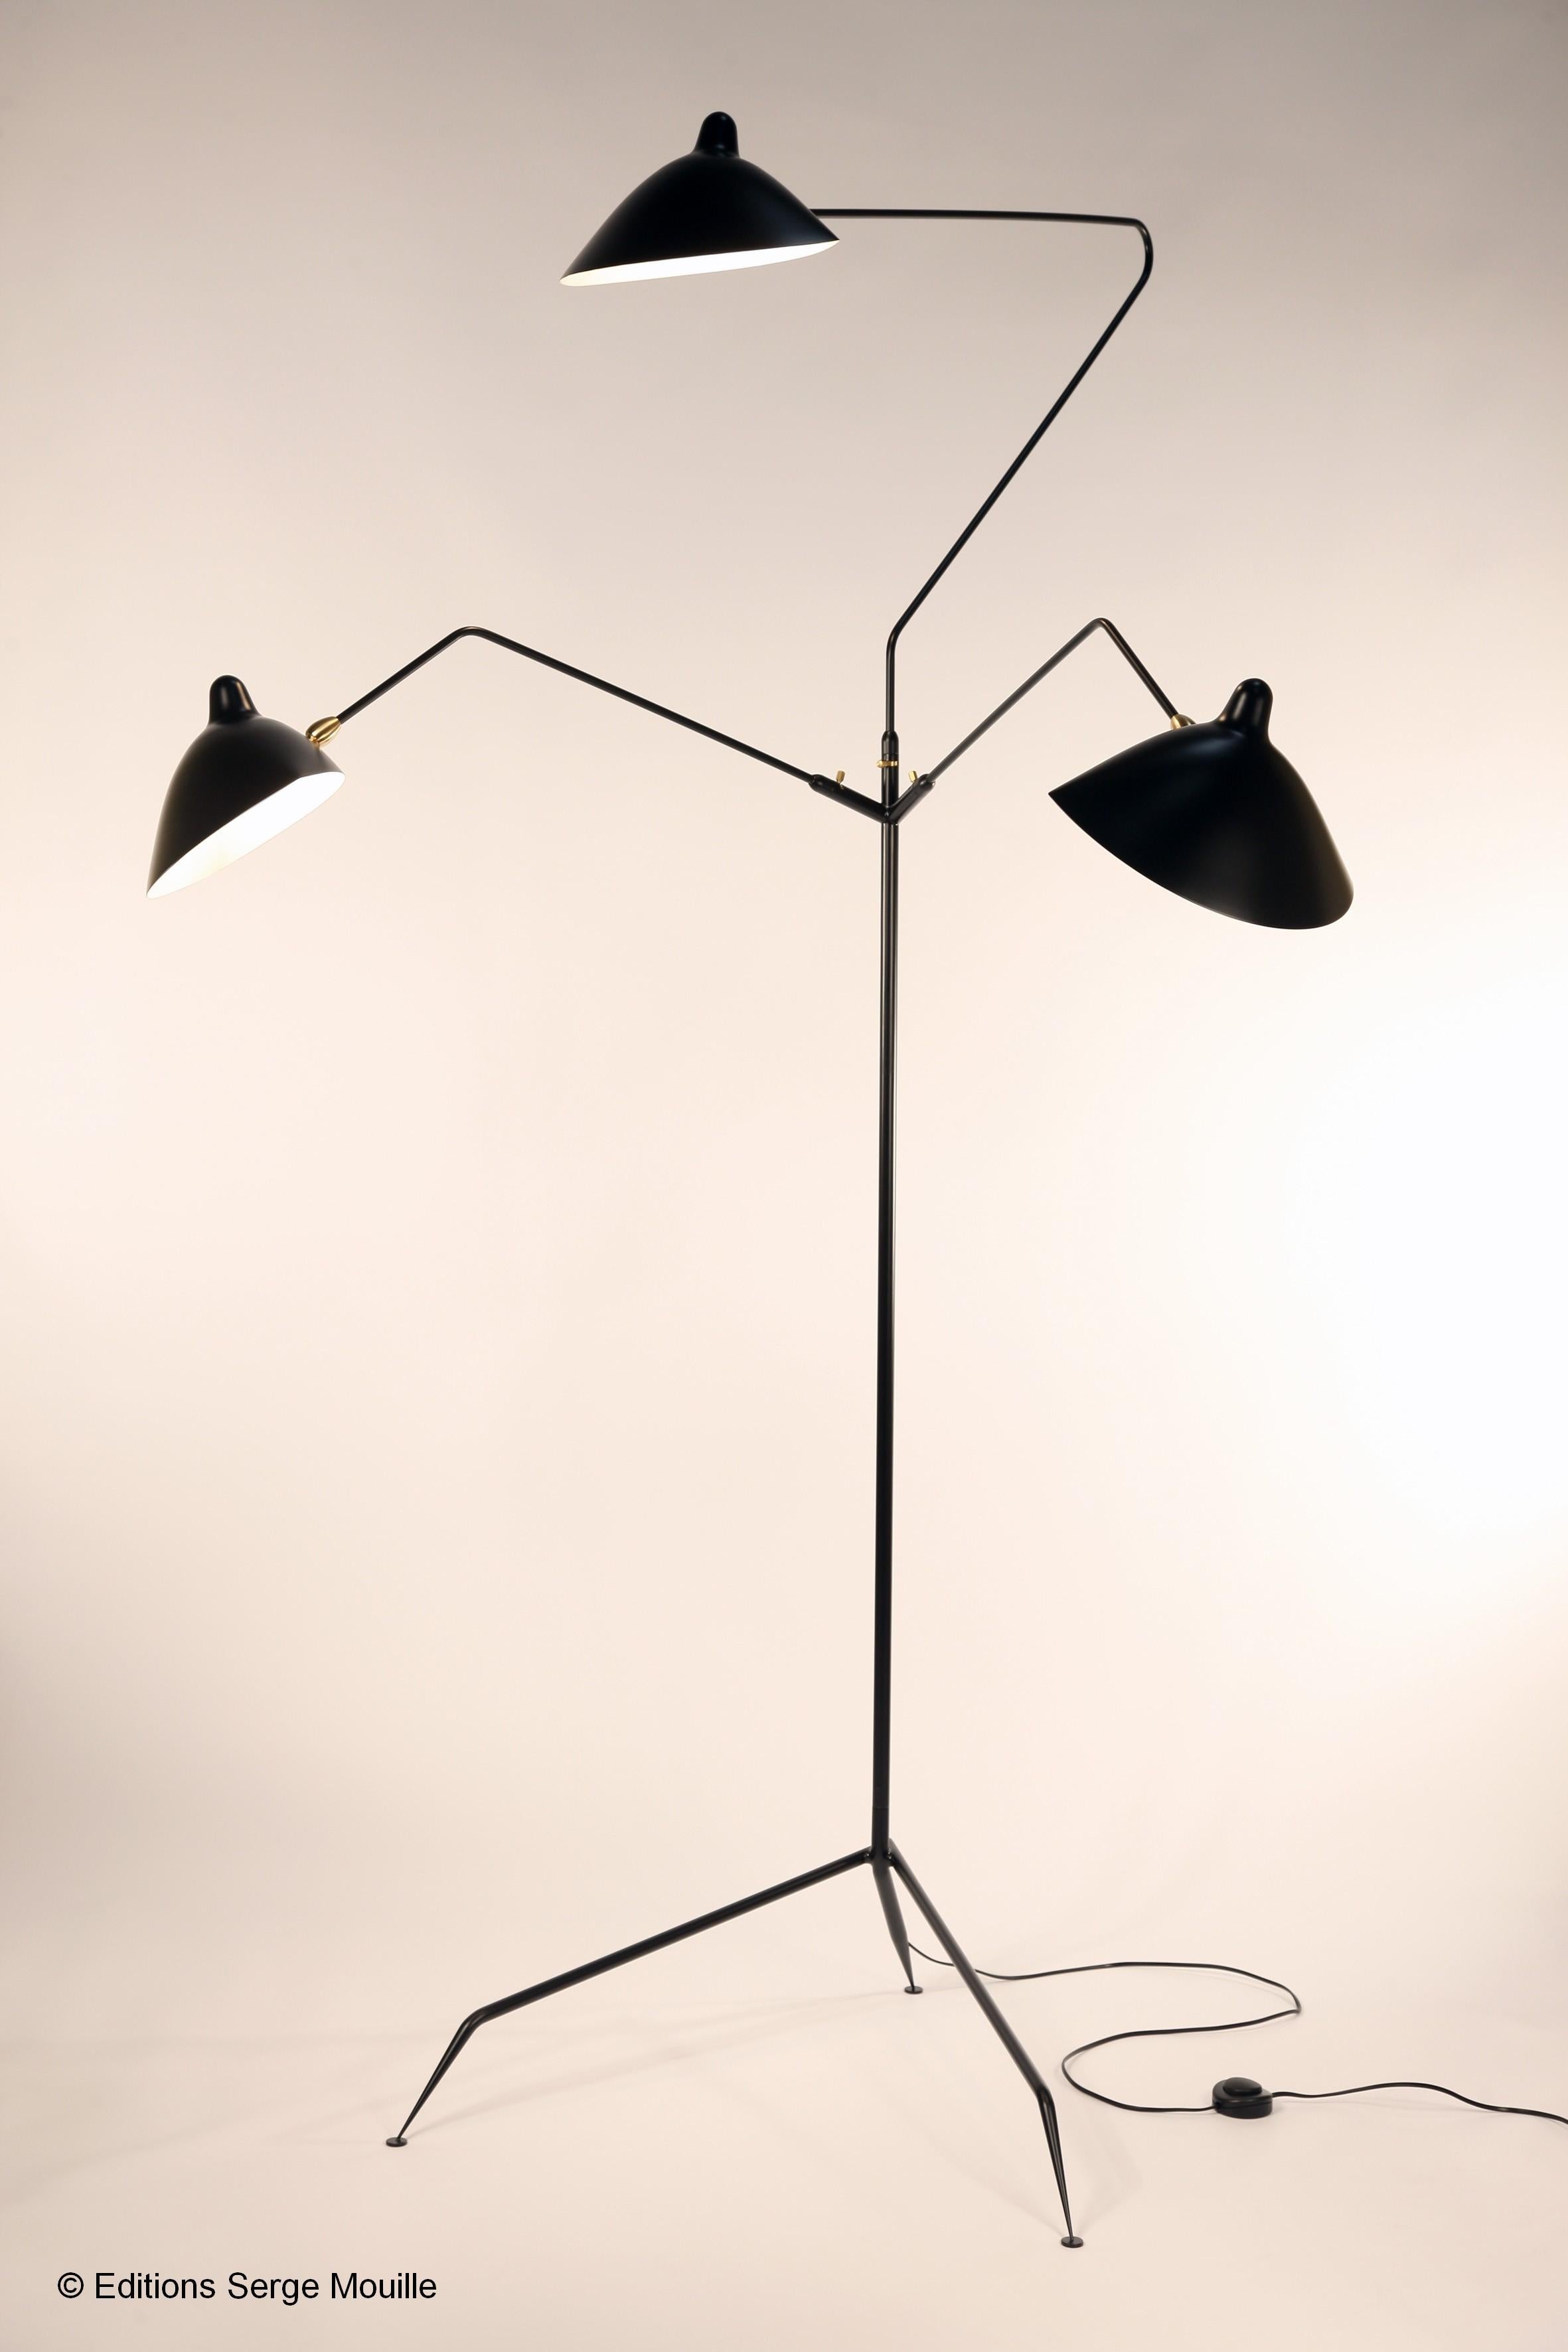 Editions Serge Mouille 'Lampadaire 3 Bras Pivotants' floor lamp. Originally designed in 1952, this iconic lamp is still made by Editions Serge Mouille in France using many of the same small-scale manufacturing techniques and scrupulous attention to